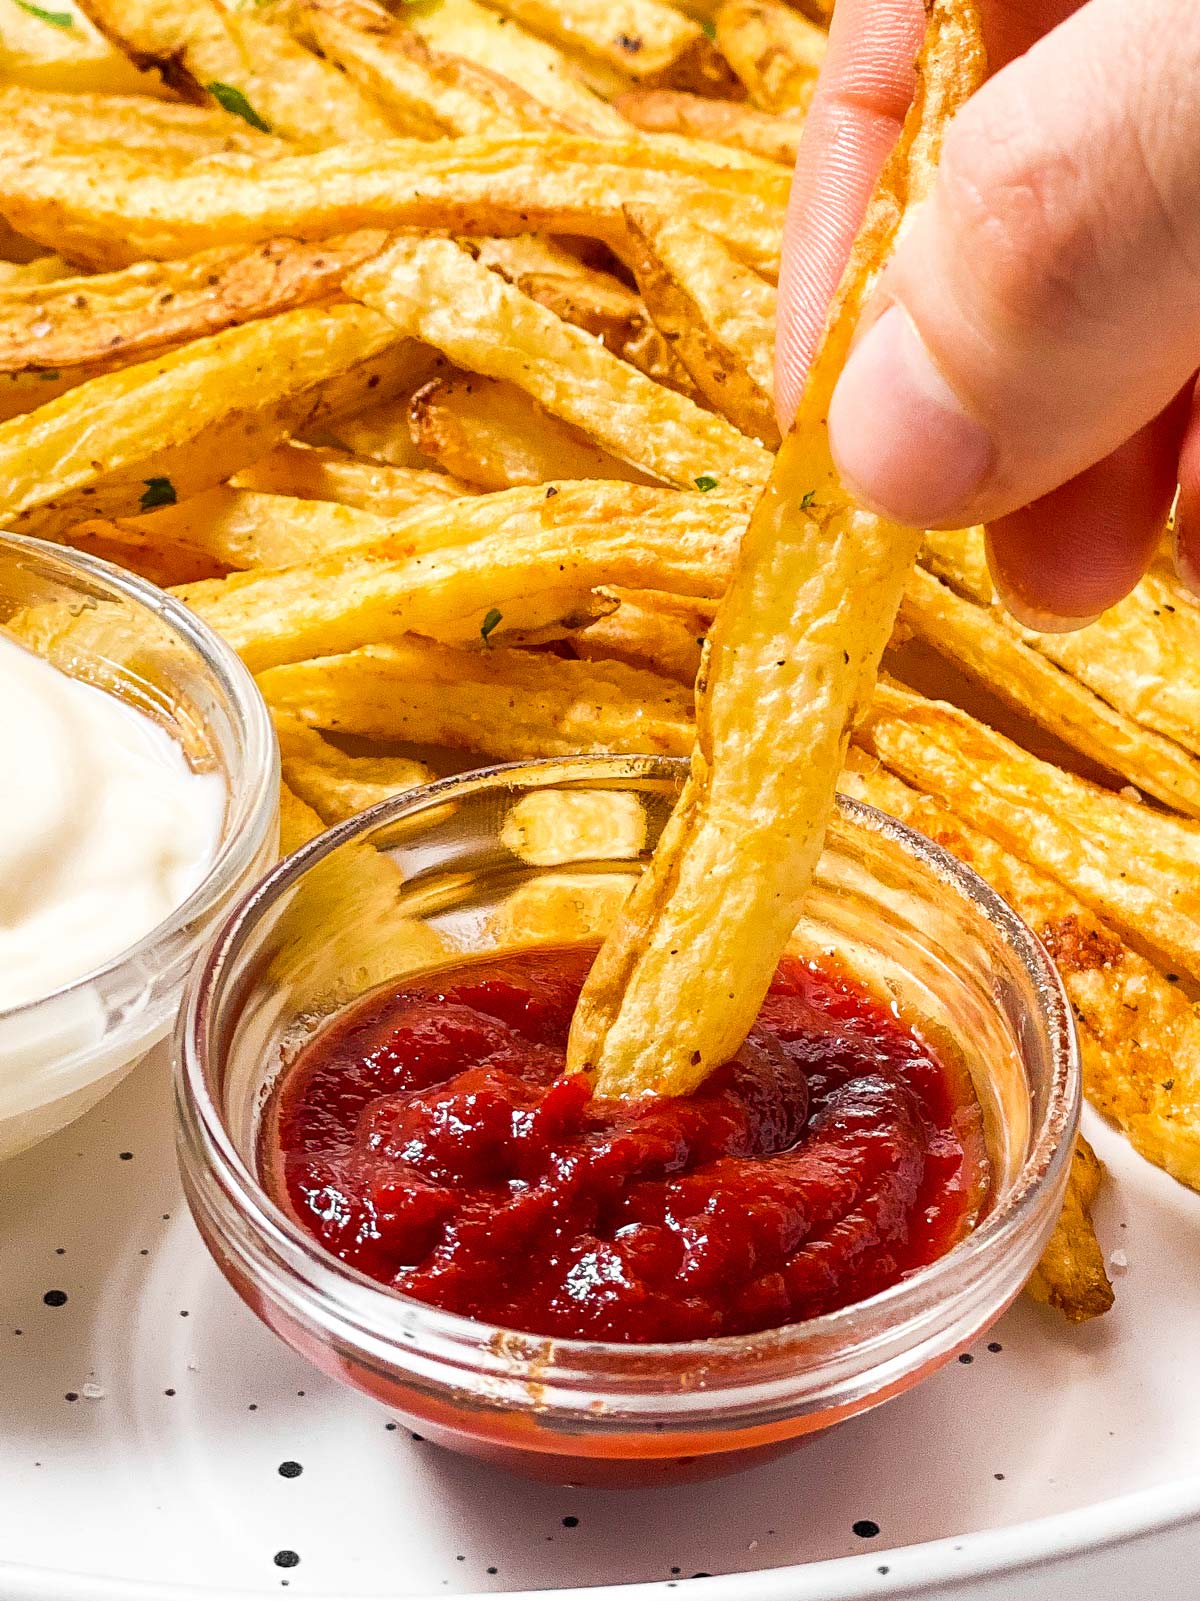 female hand dipping air fried french fry in small bowl with ketchup